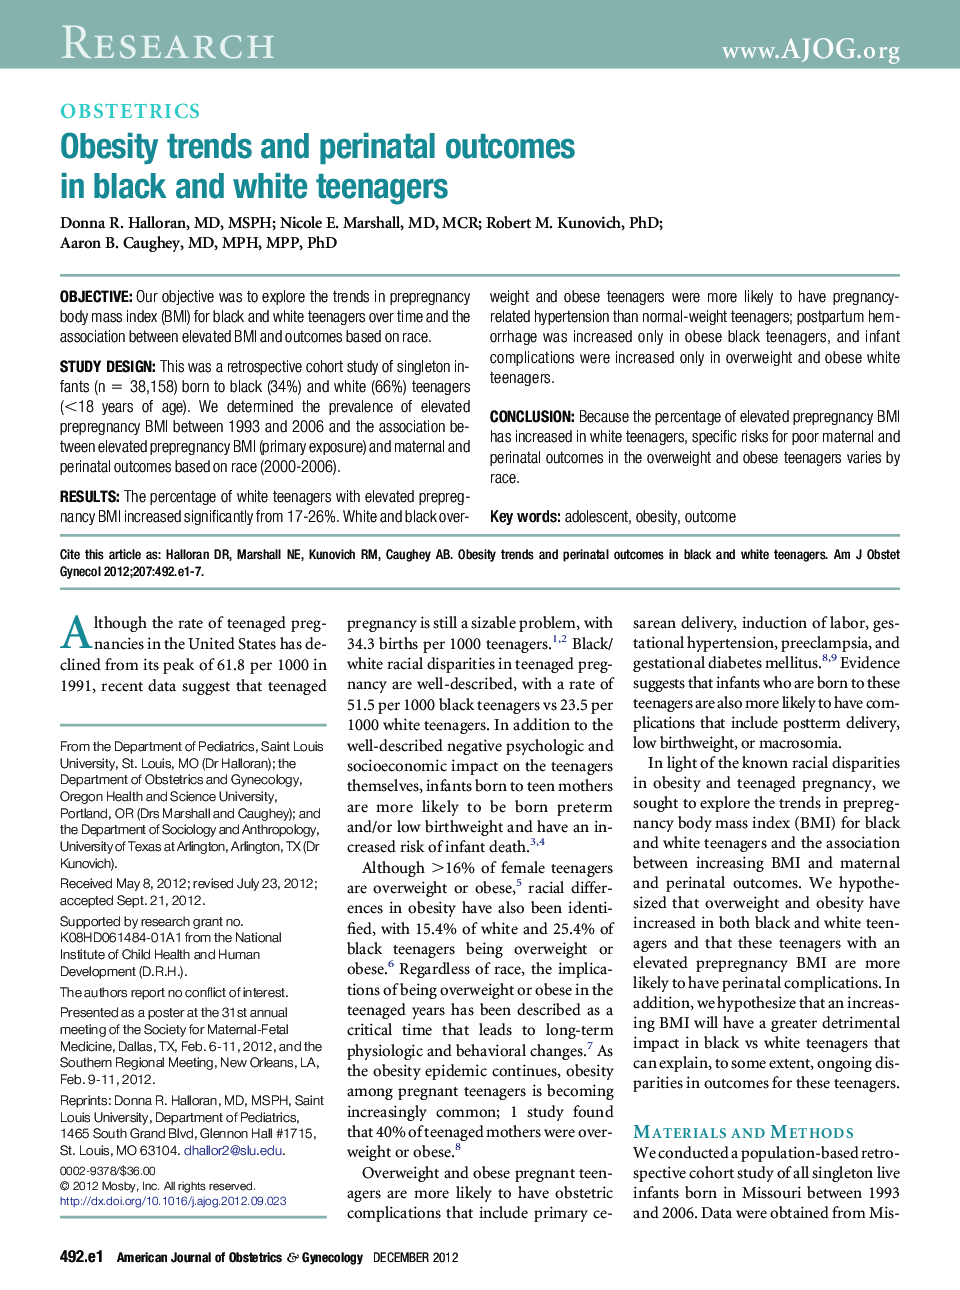 Obesity trends and perinatal outcomes in black and white teenagers